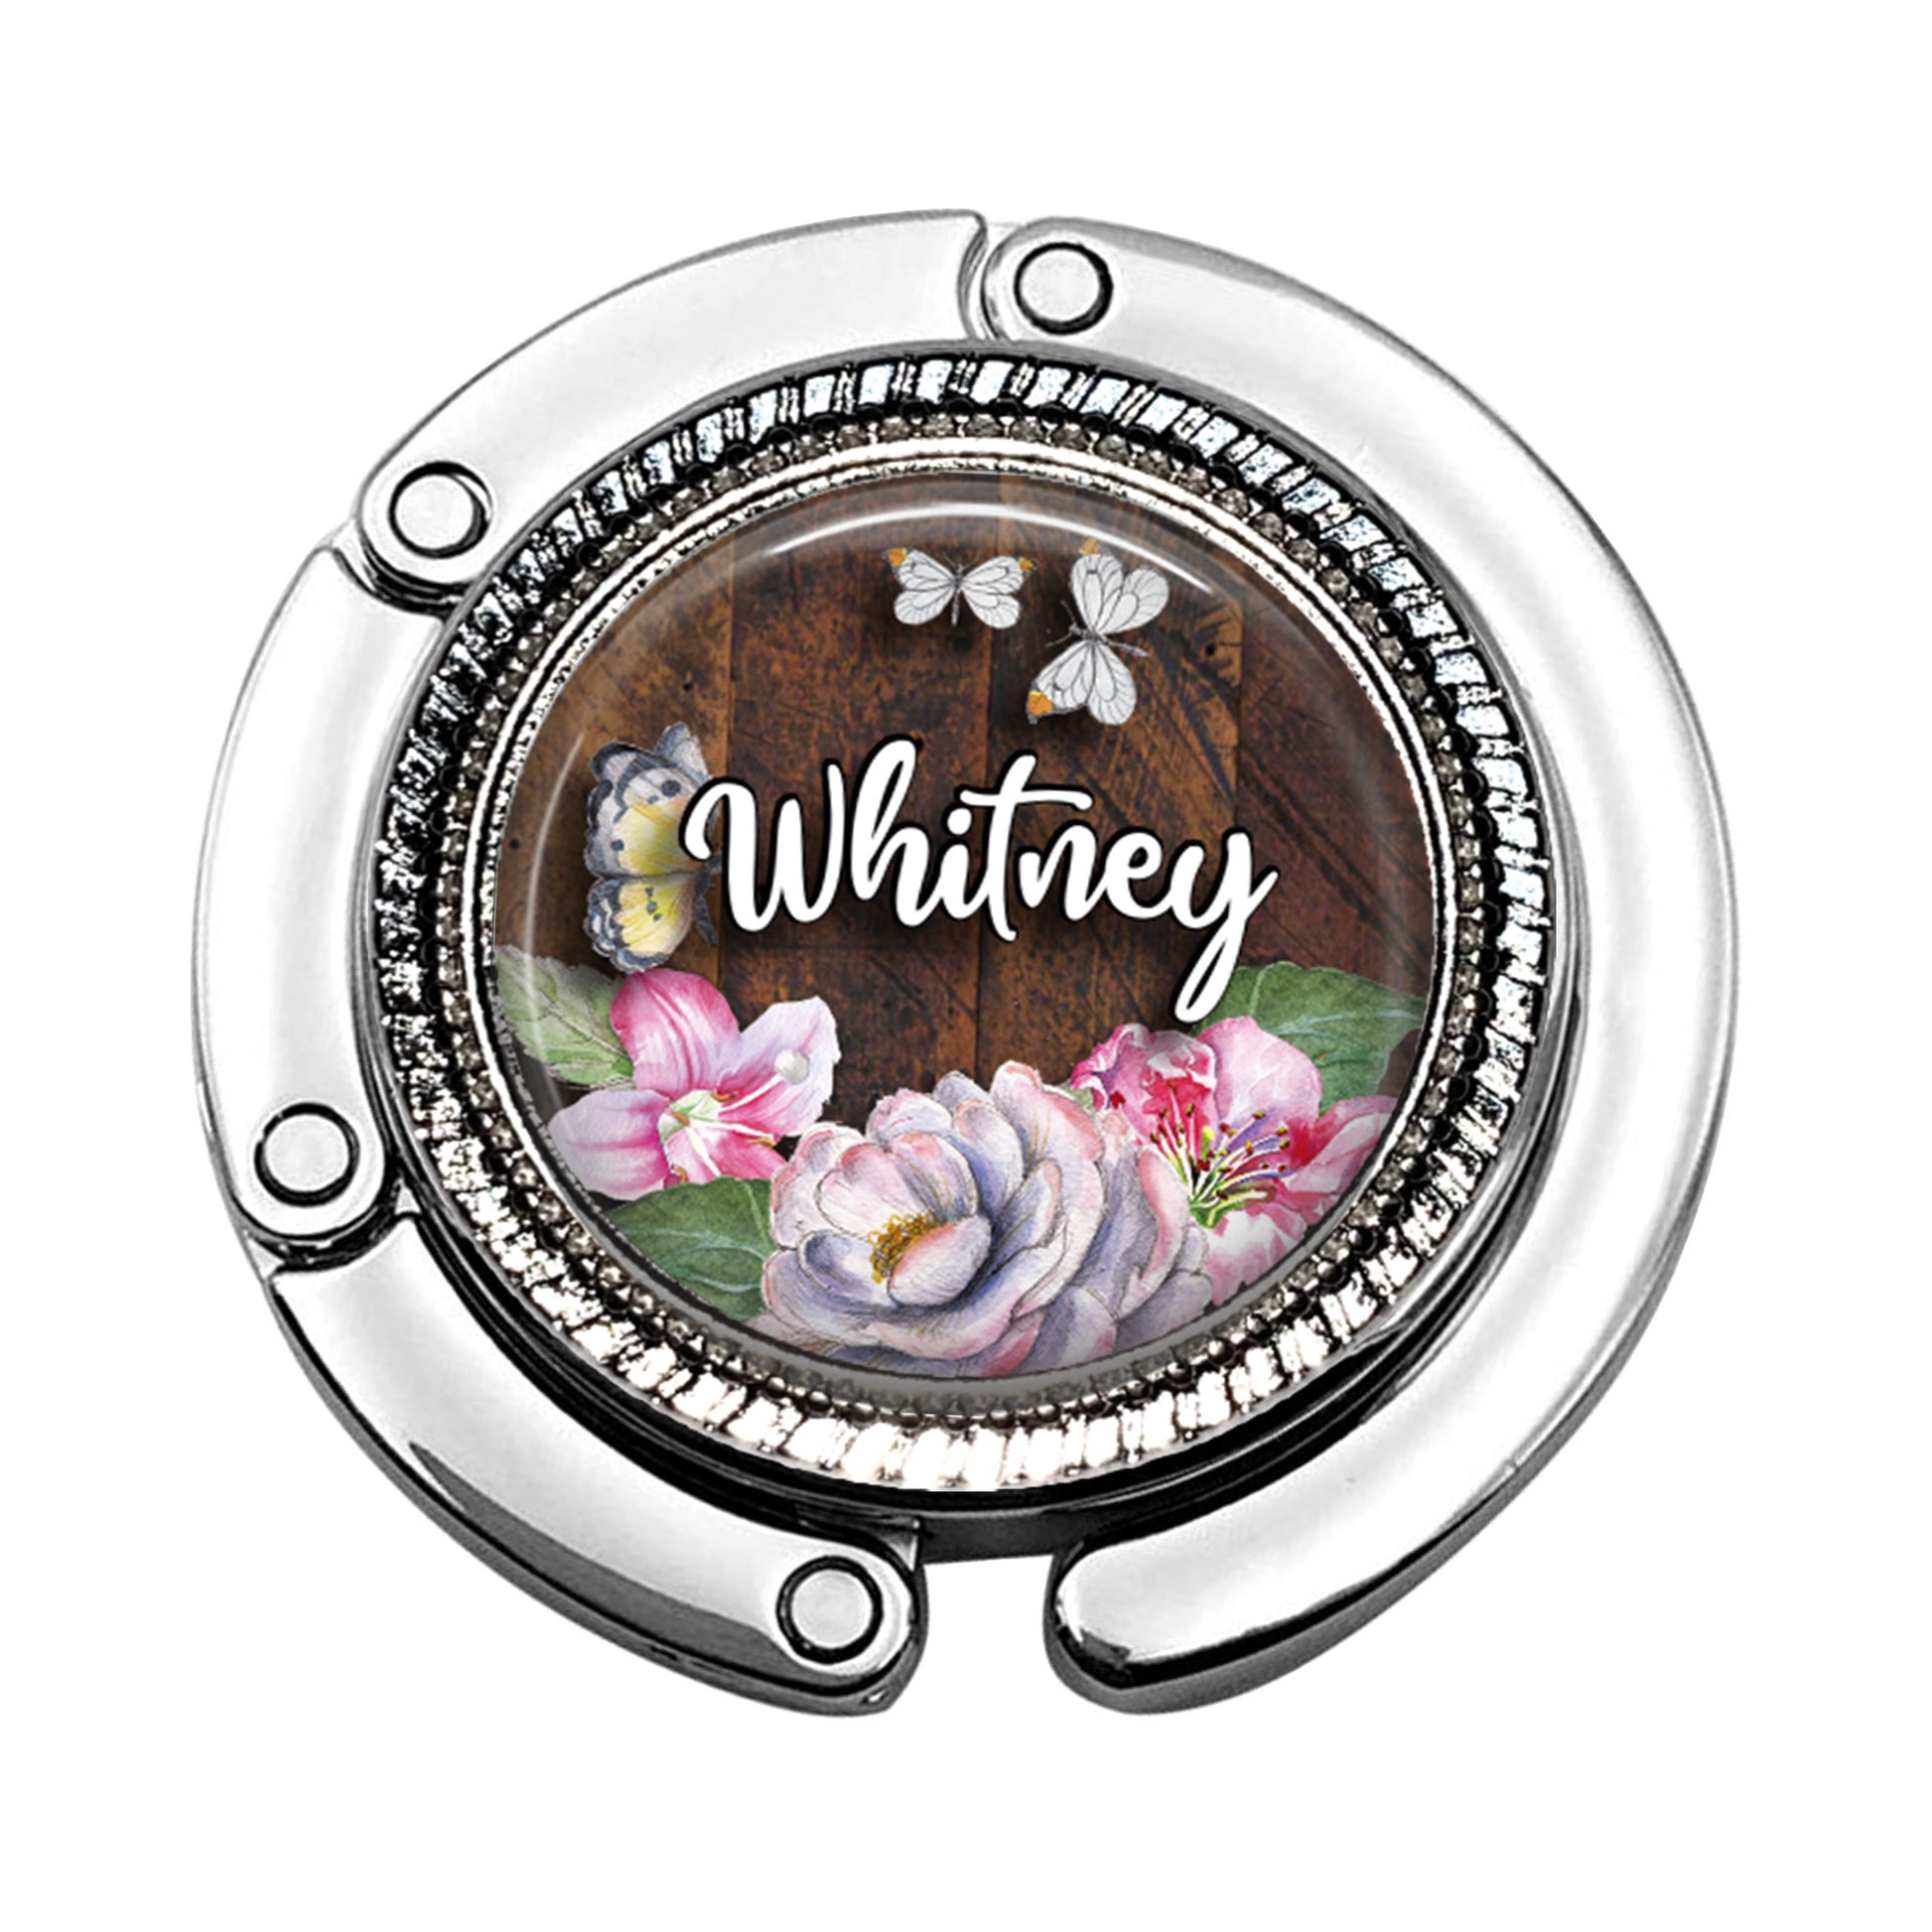 a bottle cap with a picture of flowers and butterflies on it